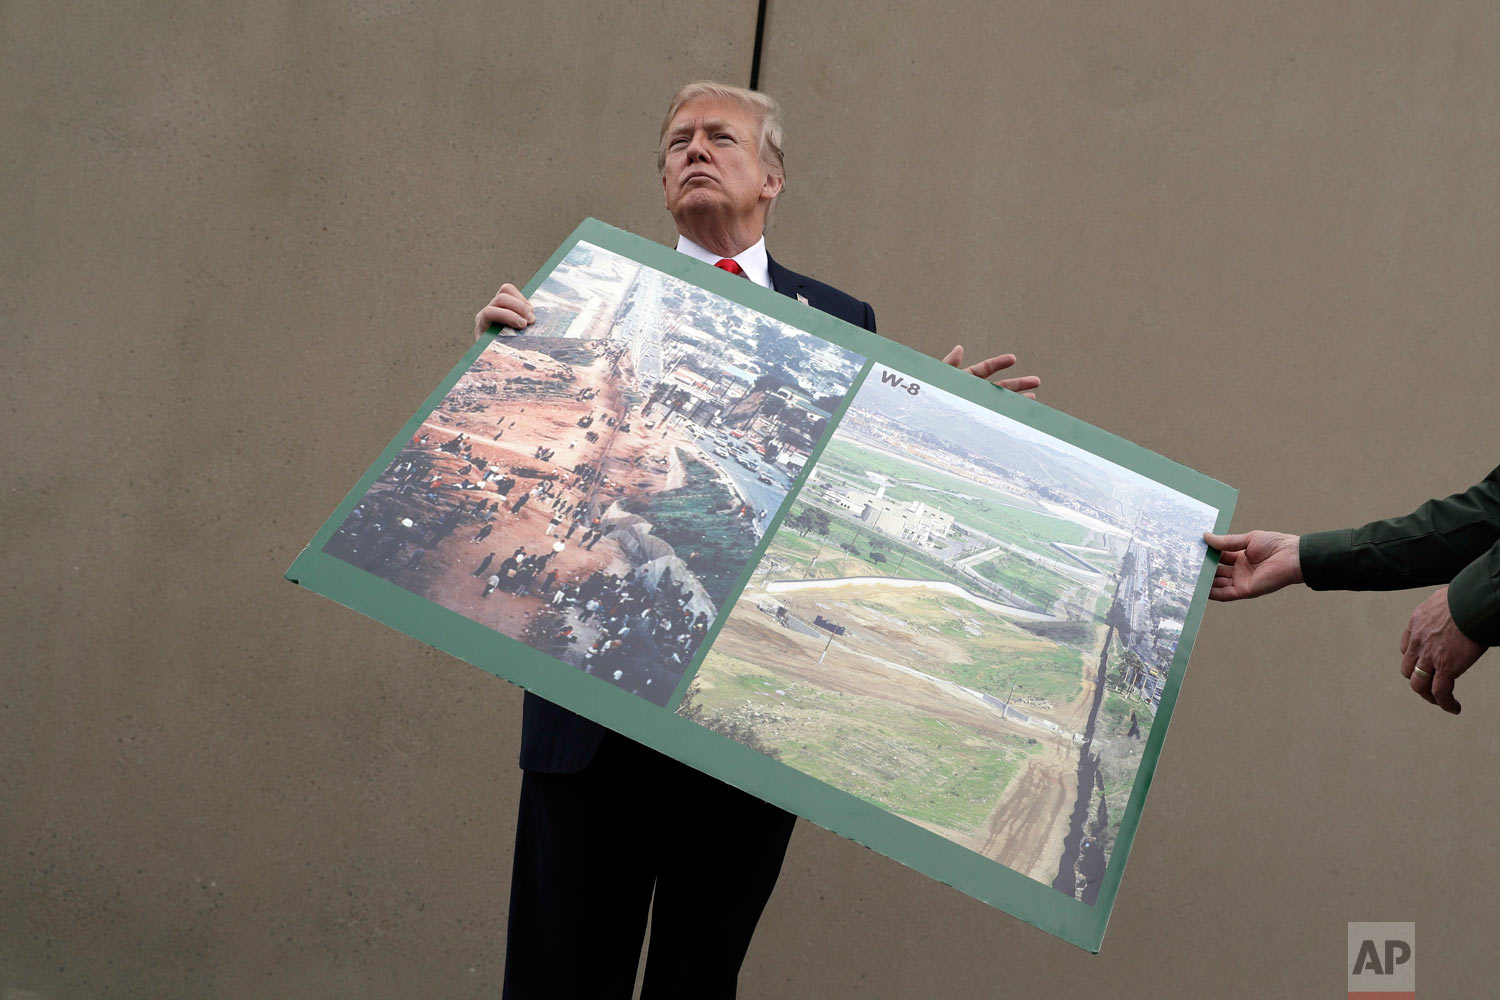  President Donald Trump holds a photo of the border area as he reviews border wall prototypes, Tuesday, March 13, 2018, in San Diego. Rodney Scott, the Border Patrol's San Diego sector chief, helps to hold the print. (AP Photo/Evan Vucci) 